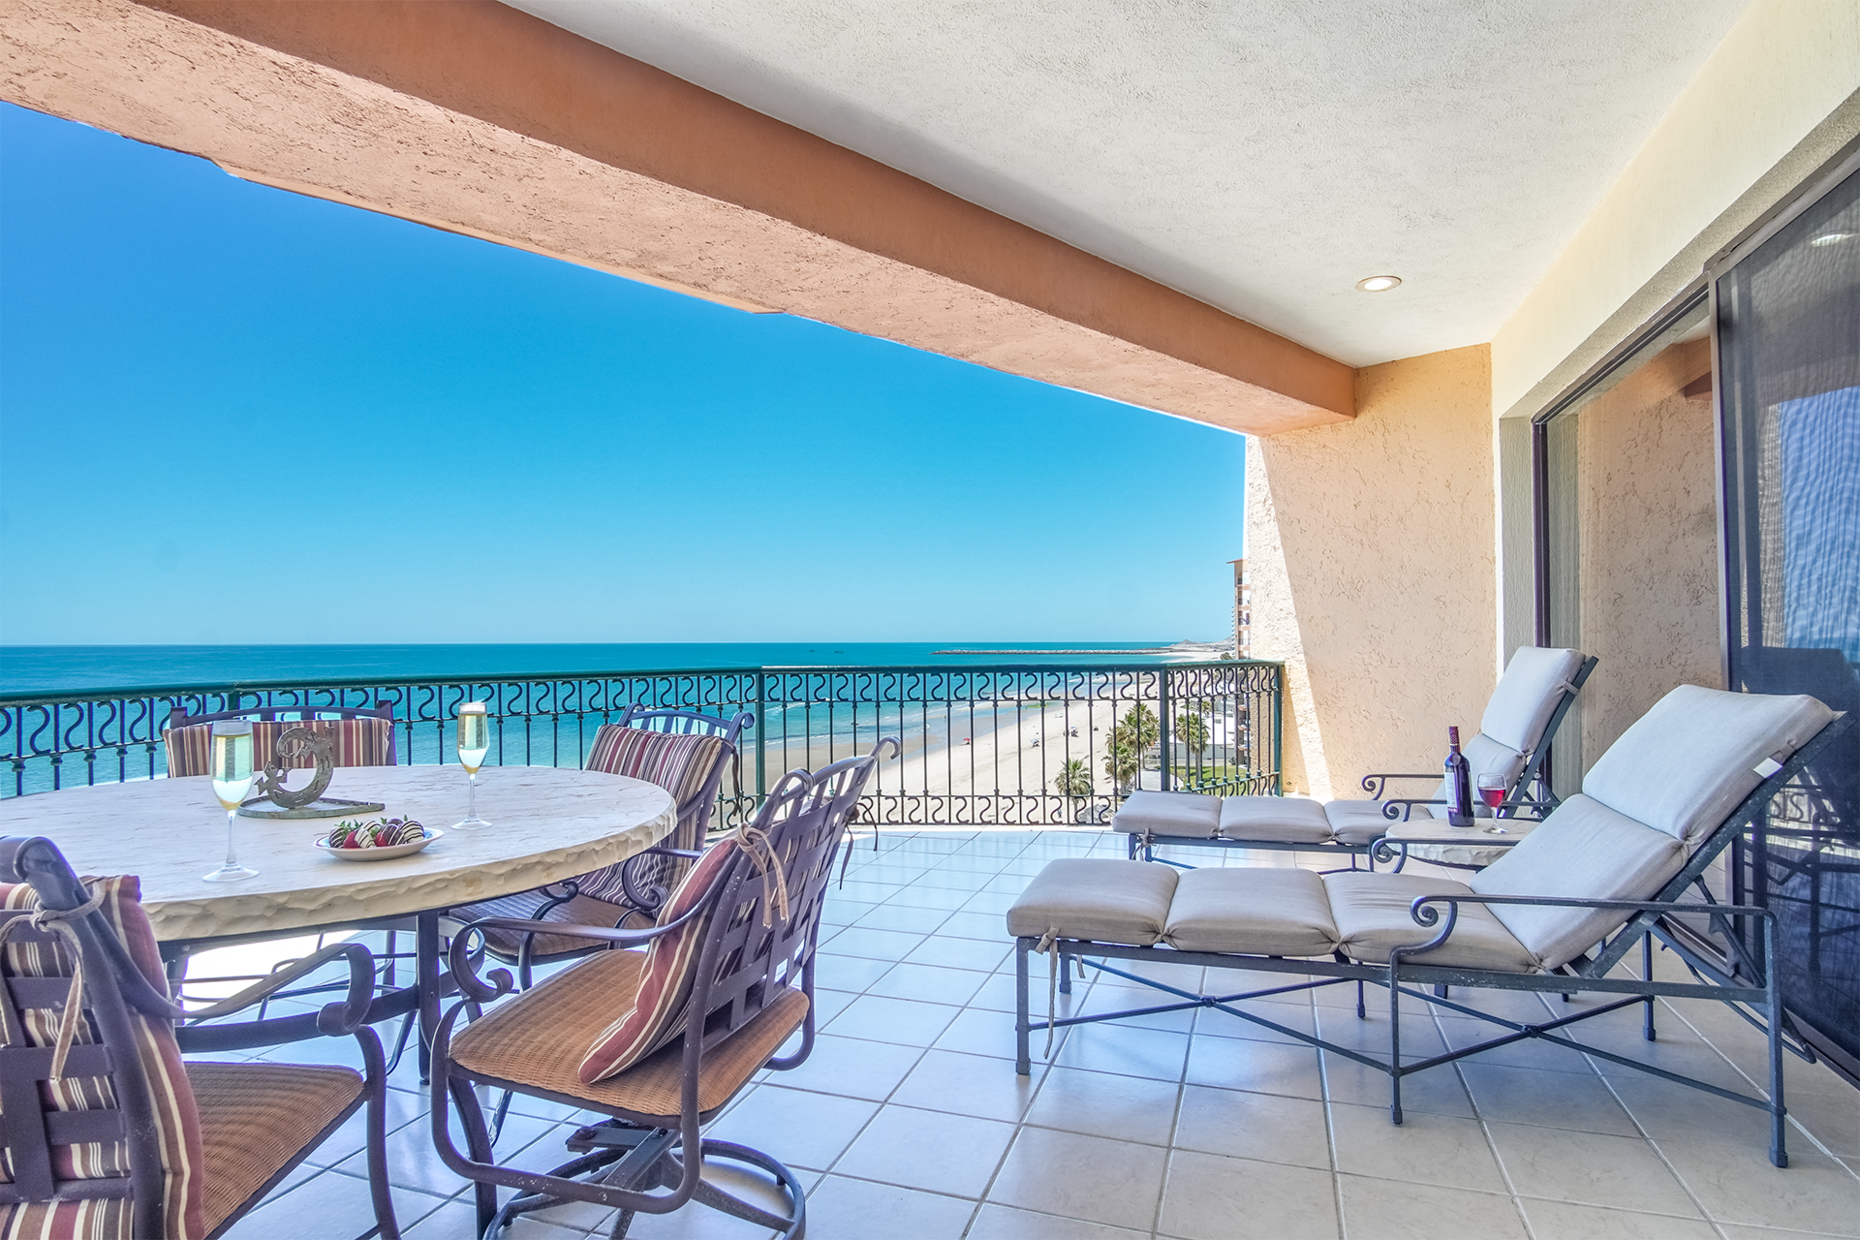 Spacious patio with lots of seating options.